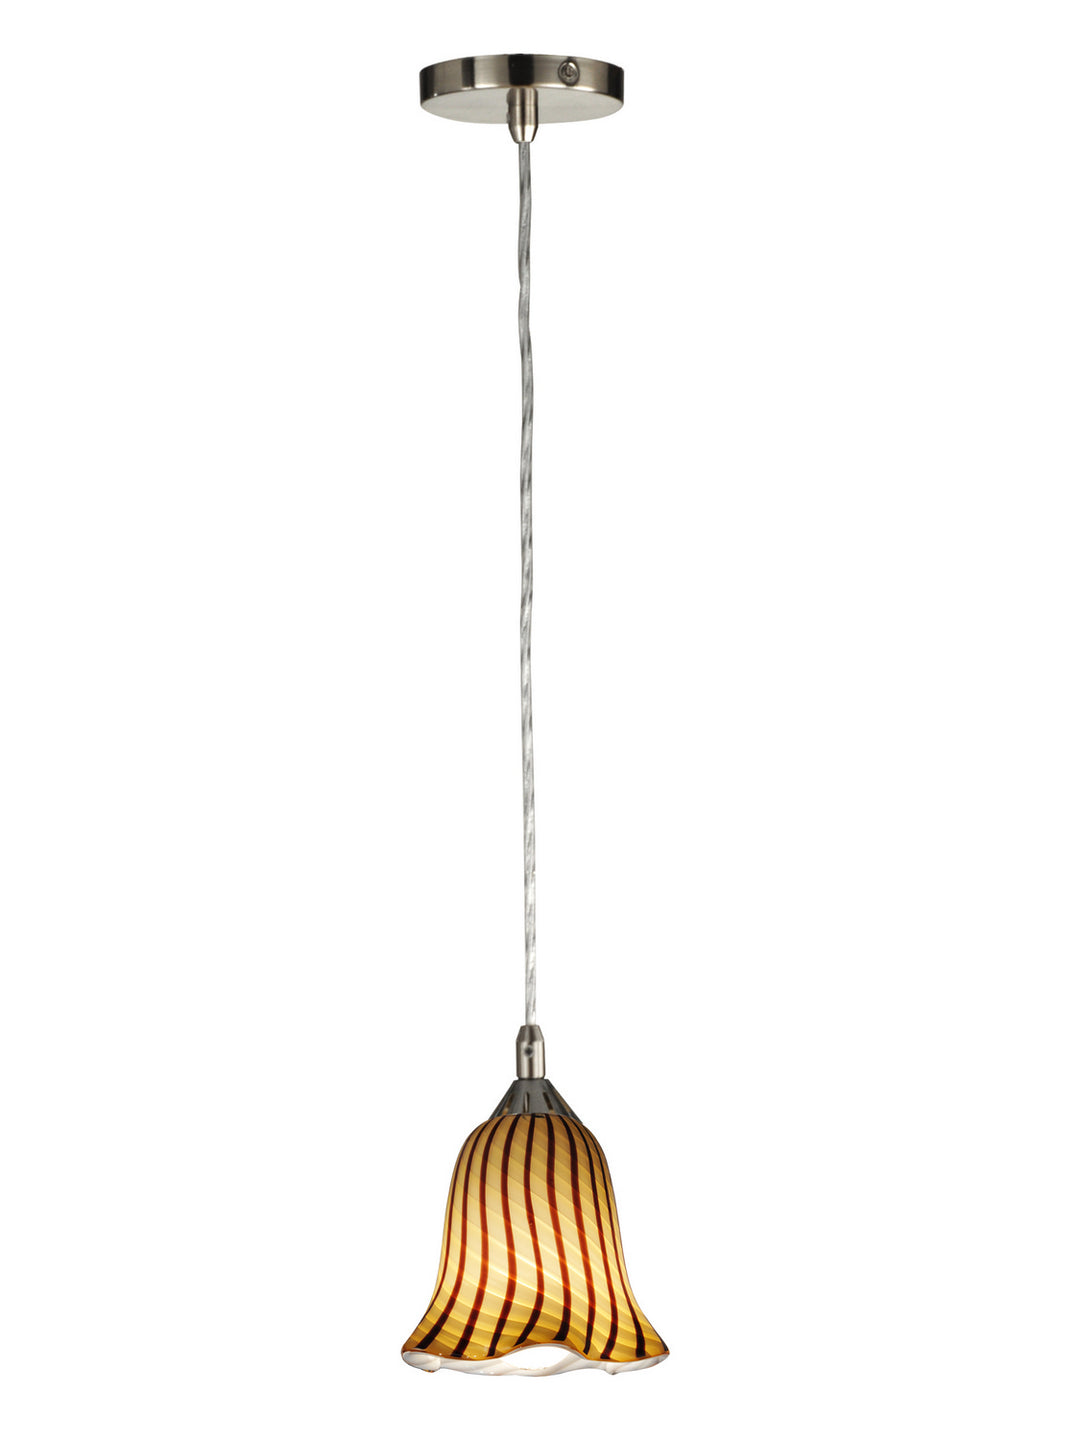 Dale Tiffany Valley Glen AH14193 Pendant Light - Satin Nickel,  try hanging in multiples over a breakfast bar,  nook or kitchen island for a stunning display. "/